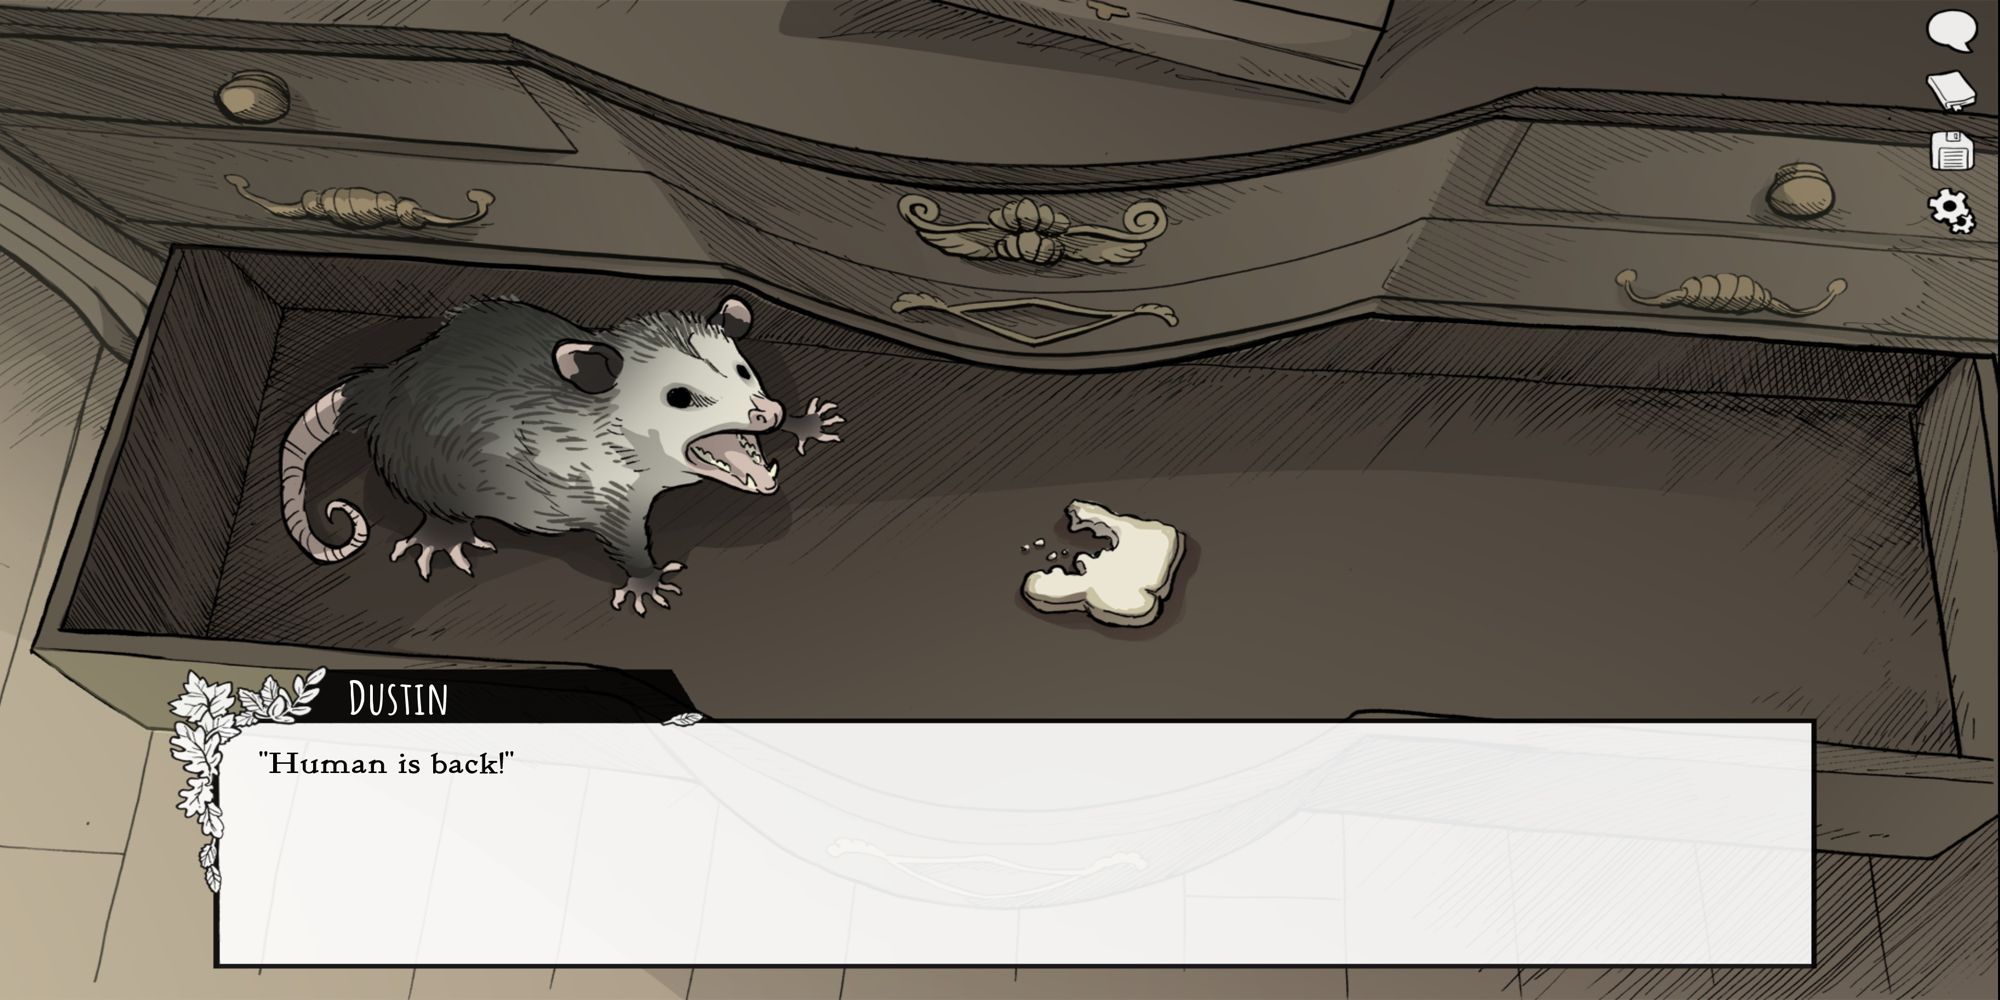 Scarlet Hollow animal talker lets you communicate with Dustin the opossum 